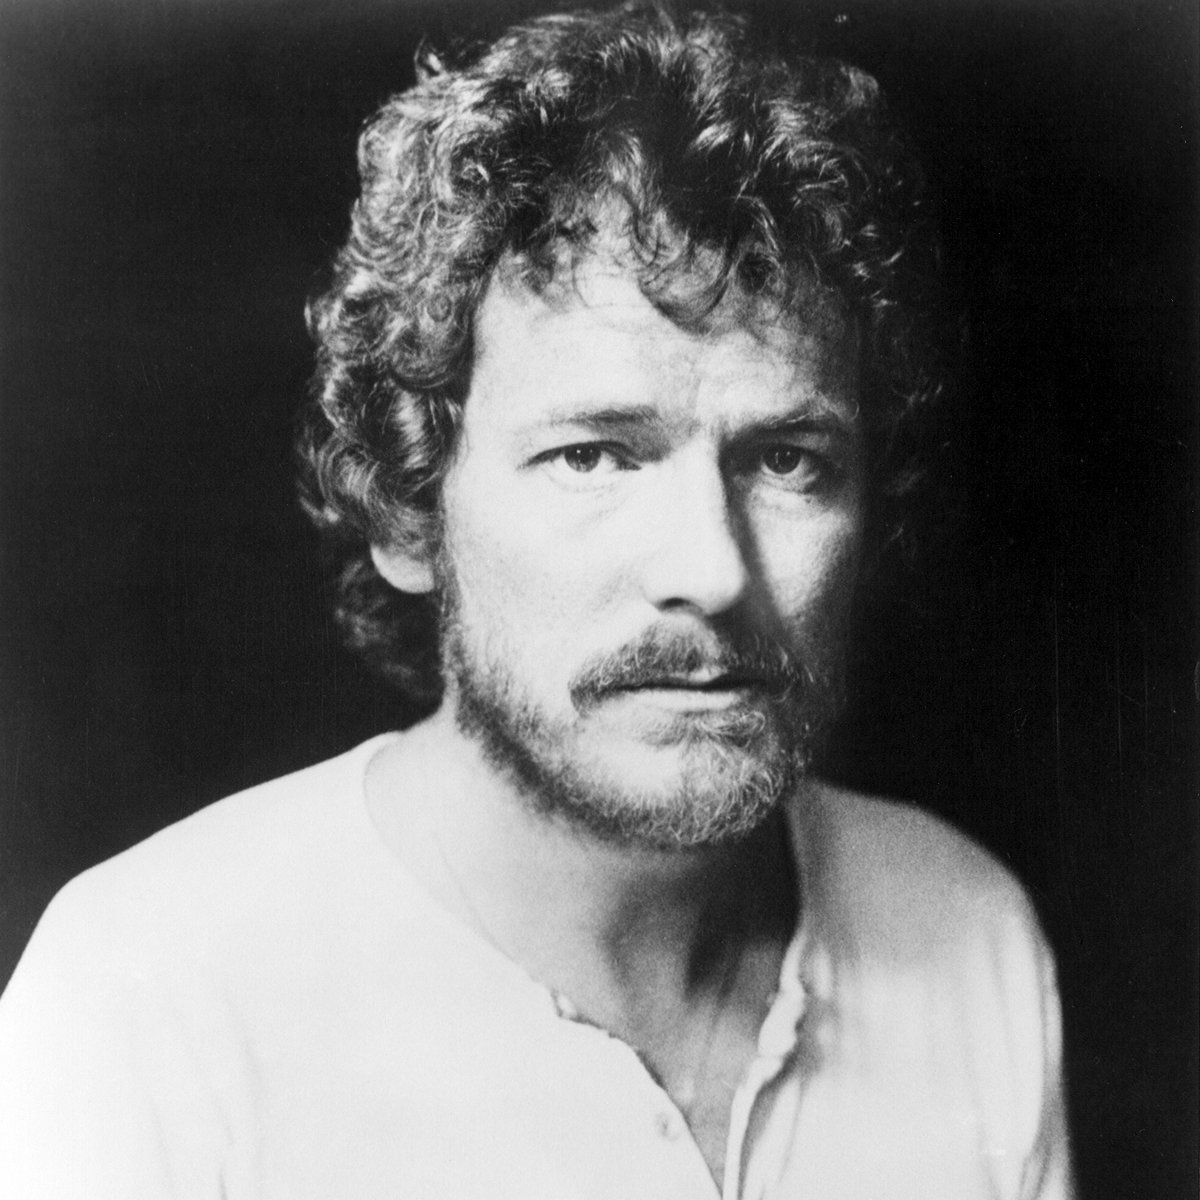 GORDON LIGHTFOOT: IF YOU COULD READ MY MIND is on at Playhouse over the next three days, with matinee showings. Celebrate the career and art of one of Canada's more remarkable musical talents. 

Tix: l8r.it/otYw

#hamont #playhousecinema #indiecinema @Barton_Village